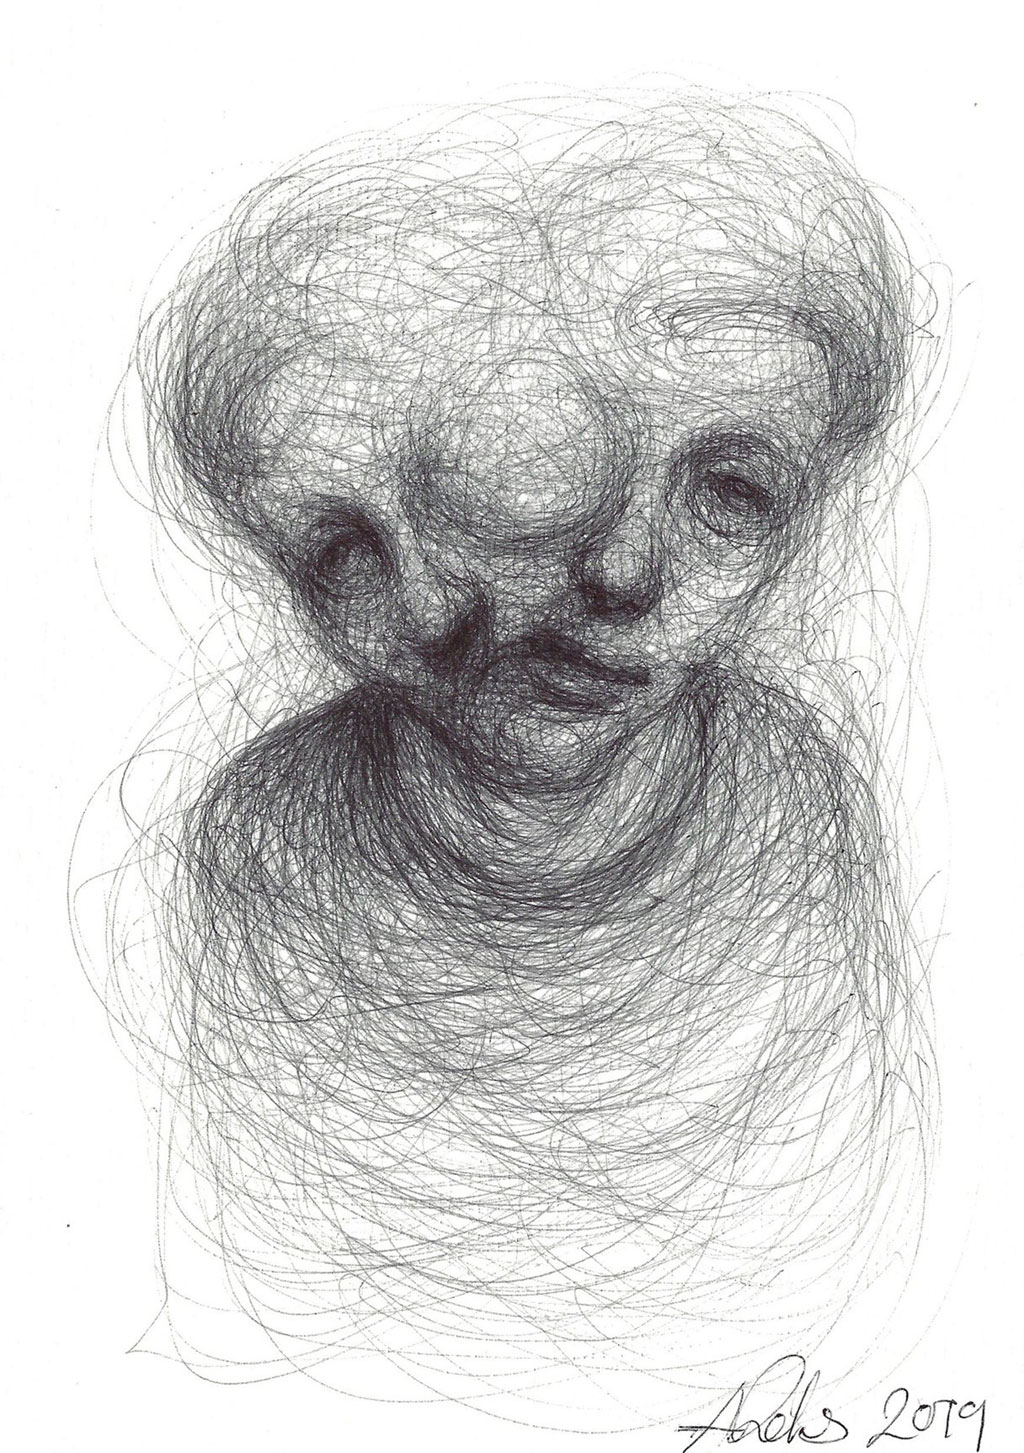 Ballpoint pen drawing of a figure with two faces emerging from the same head